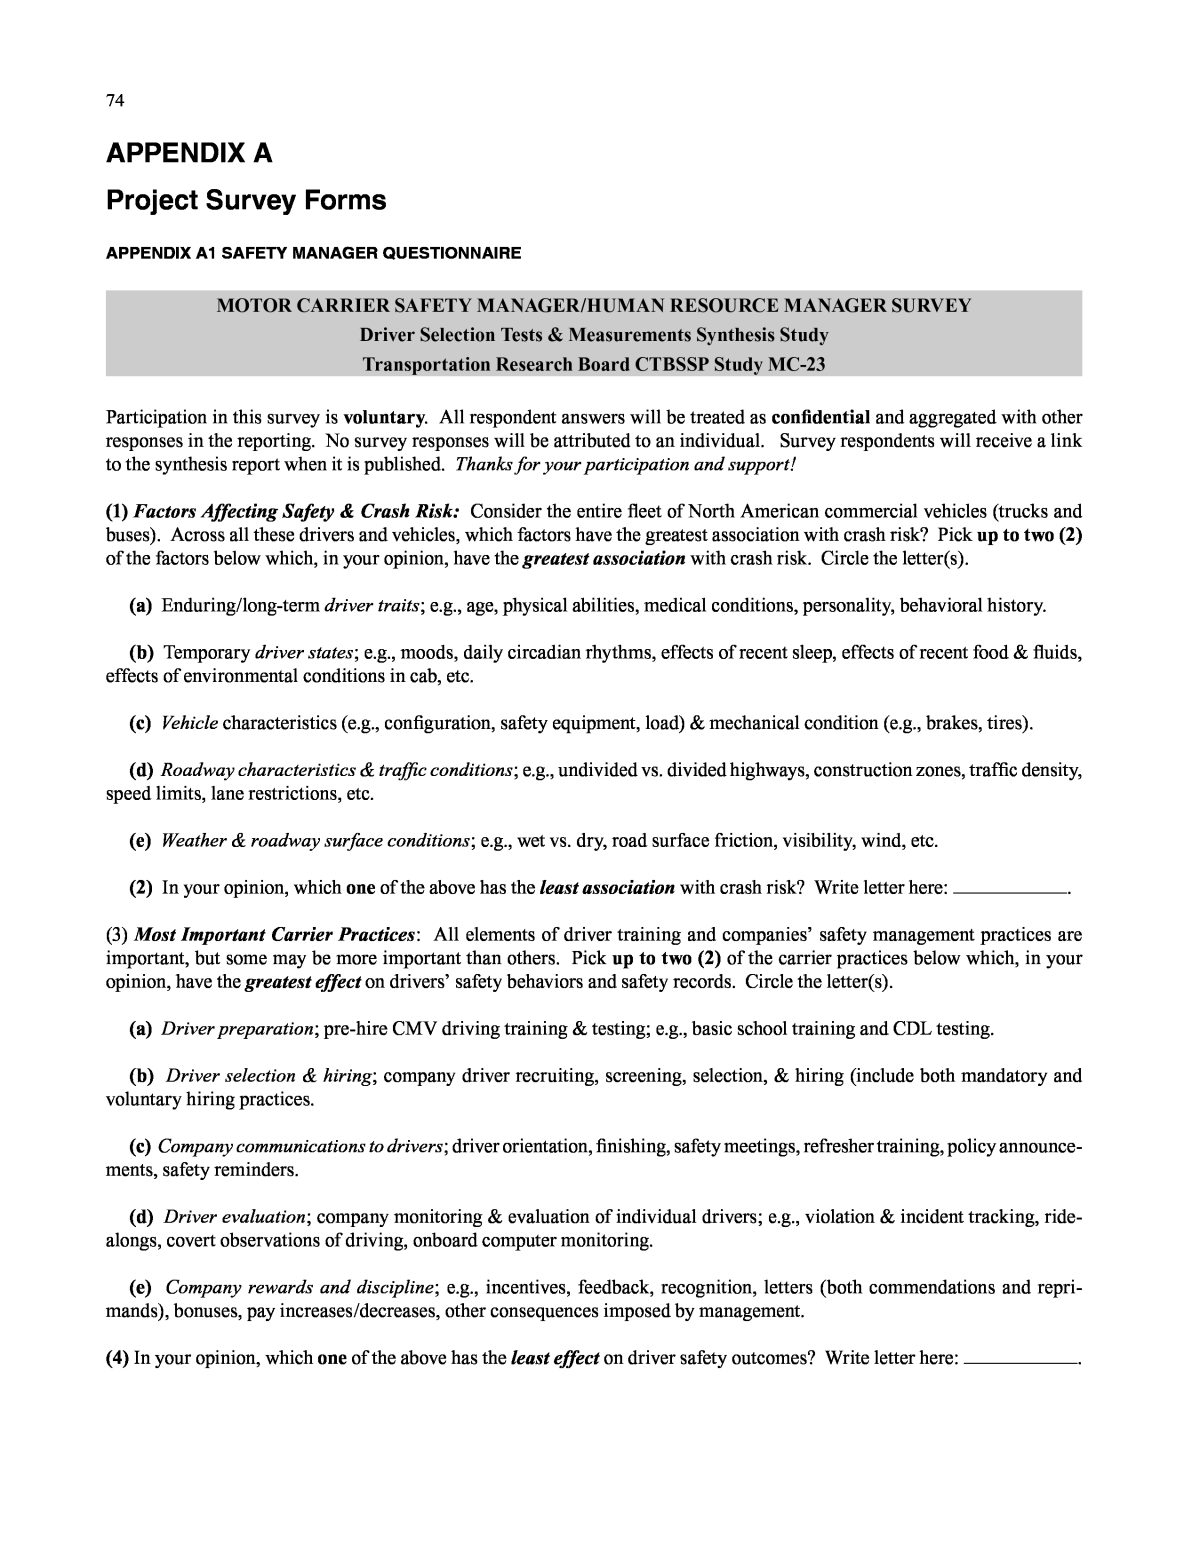 APPENDIX A Project Survey Forms  Driver Selection Tests and